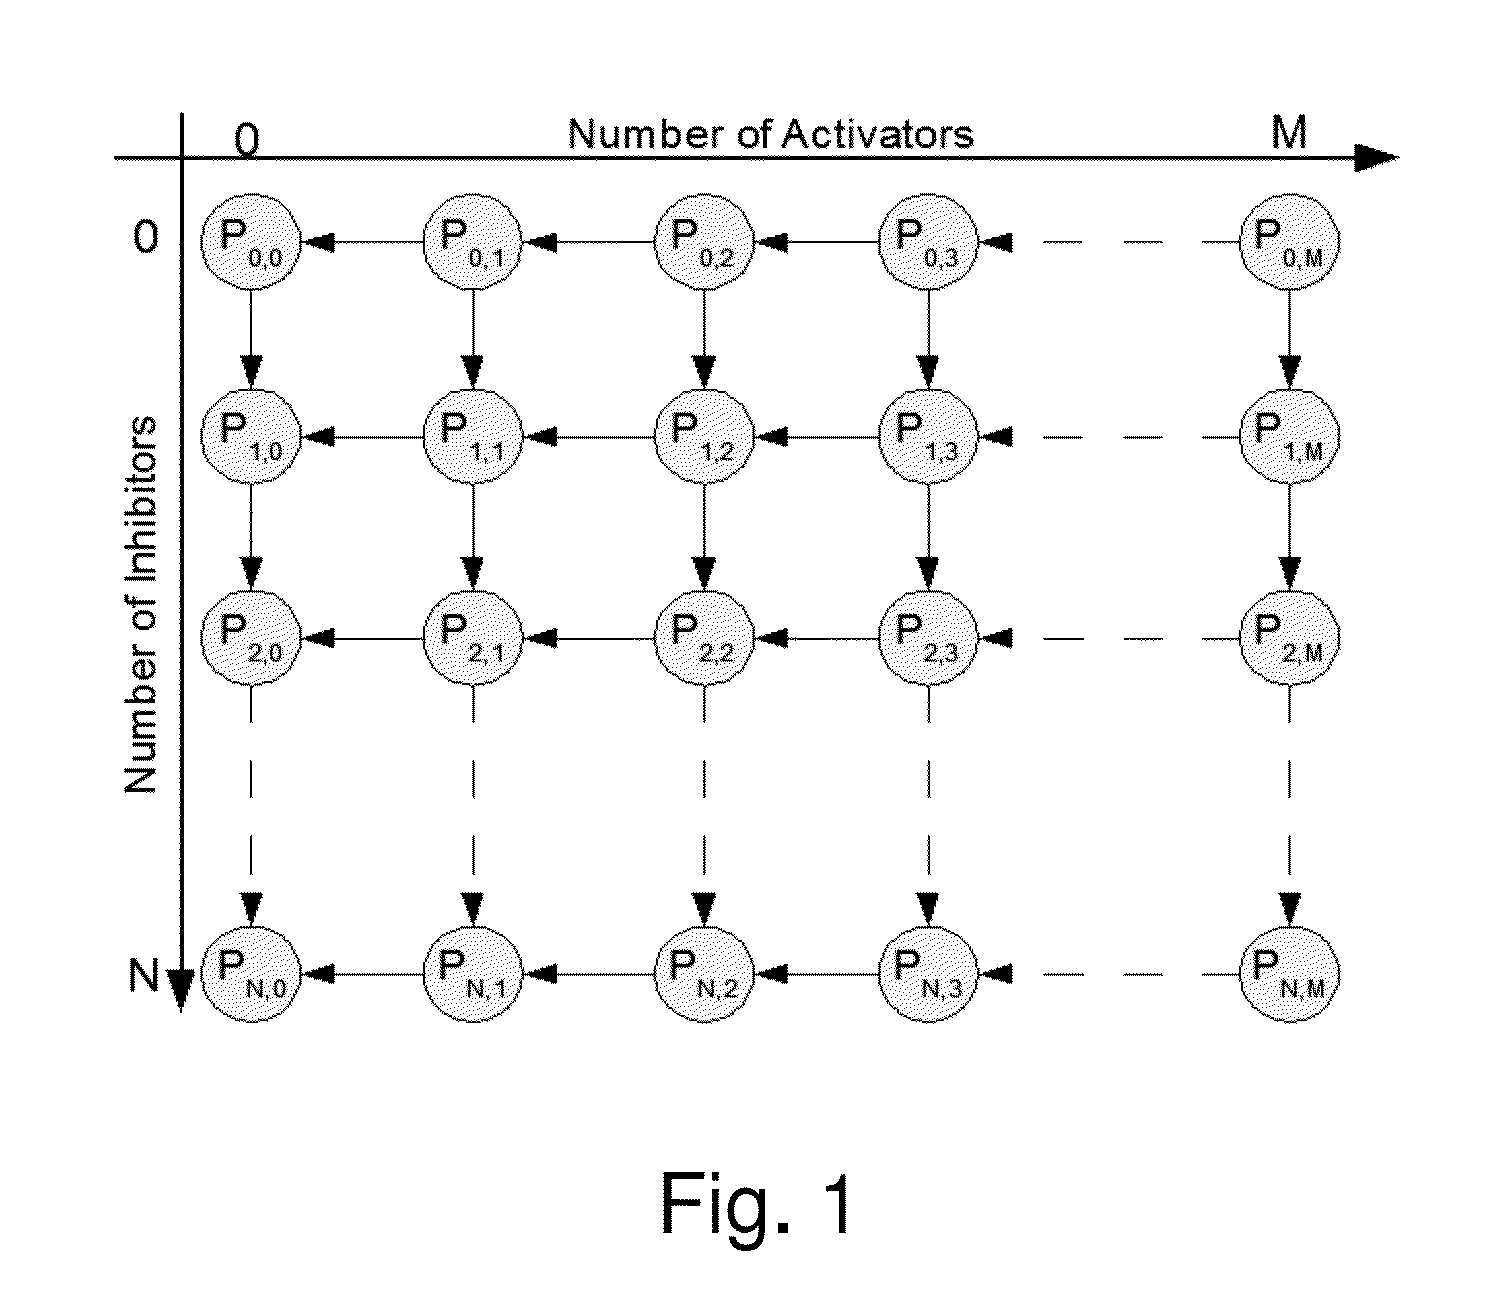 Systems and Methods for Identifying Drug Targets Using Biological Networks